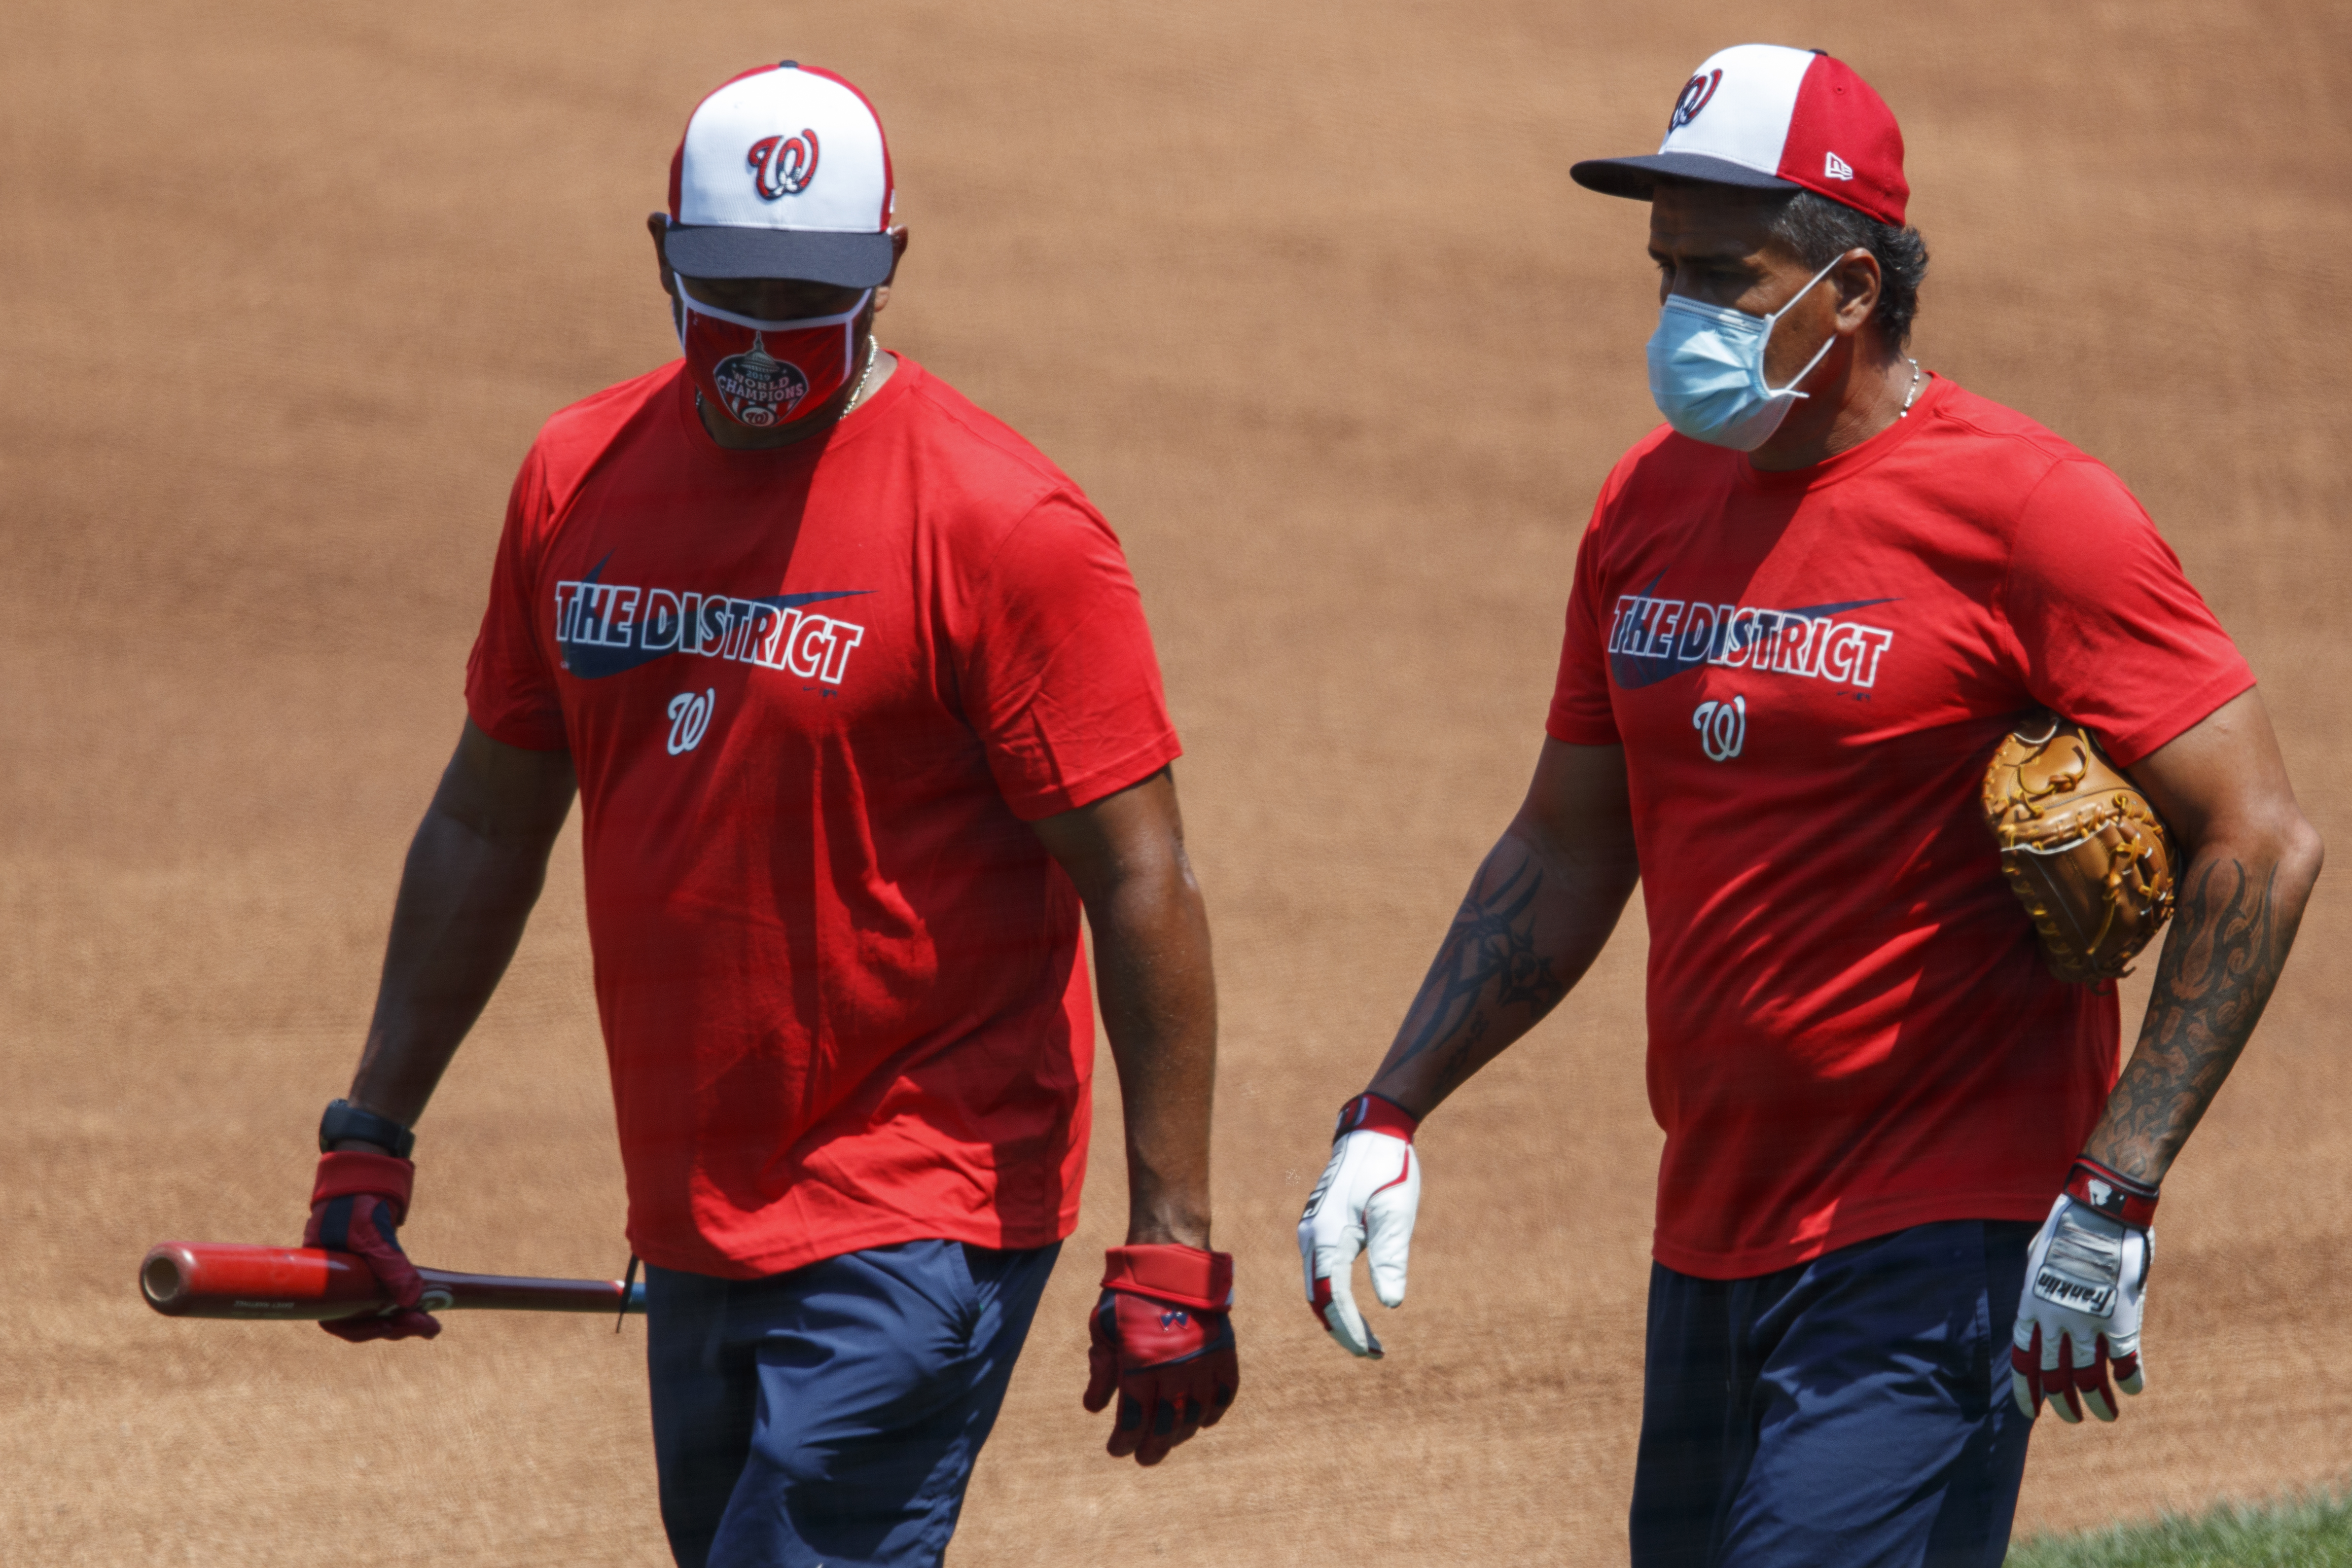 Nats, Astros, Cards cancel workouts over virus testing delay